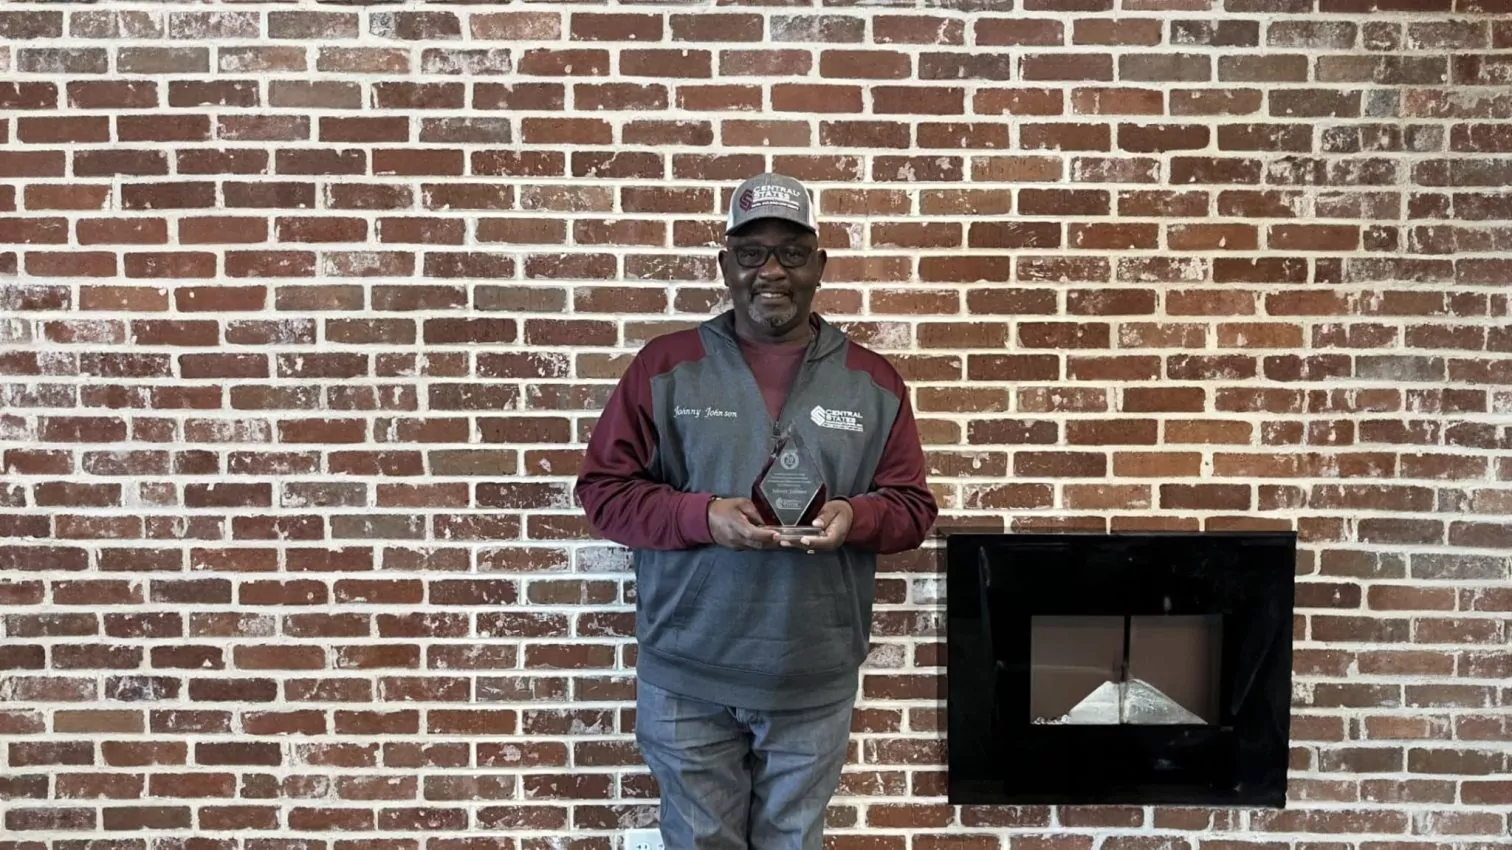 Central States Manufacturing employee-owner driver Johnny Johnson with 20 year award